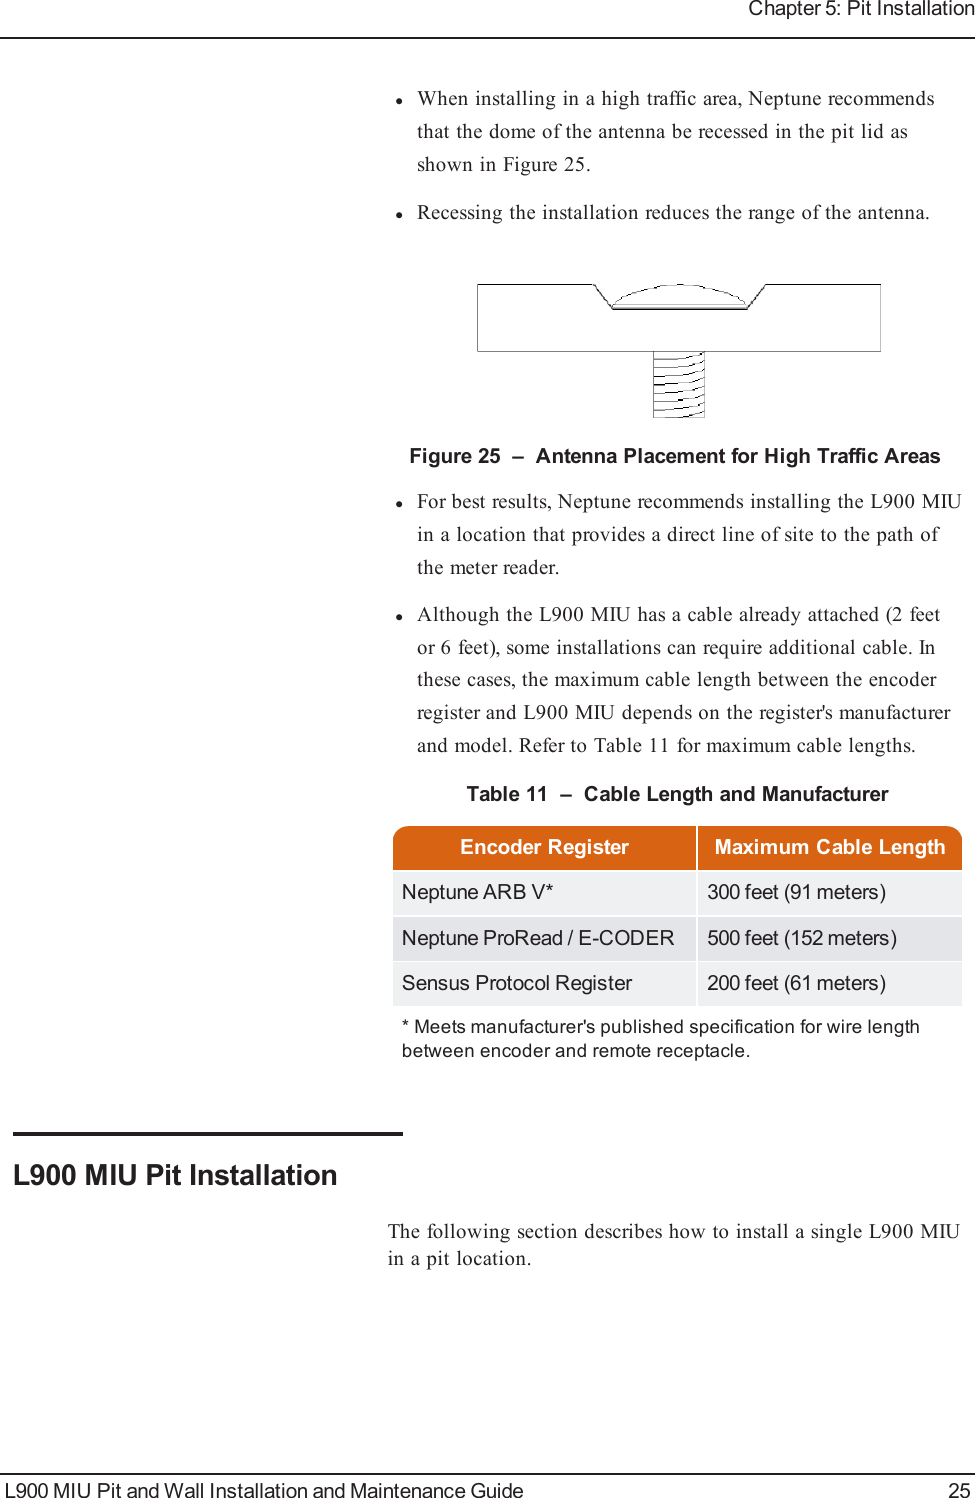 lWhen installing in a high traffic area, Neptune recommendsthat the dome of the antenna be recessed in the pit lid asshown in Figure 25.lRecessing the installation reduces the range of the antenna.Figure 25 – Antenna Placement for High Traffic AreaslFor best results, Neptune recommends installing the L900 MIUin a location that provides a direct line of site to the path ofthe meter reader.lAlthough the L900 MIU has a cable already attached (2 feetor 6 feet), some installations can require additional cable. Inthese cases, the maximum cable length between the encoderregister and L900 MIU depends on the register&apos;s manufacturerand model. Refer to Table 11 for maximum cable lengths.Encoder Register Maximum Cable LengthNeptune ARB V* 300 feet (91 meters)Neptune ProRead / E-CODER 500 feet (152 meters)Sensus Protocol Register 200 feet (61 meters)* Meets manufacturer&apos;s published specification for wire lengthbetween encoder and remote receptacle.Table 11 – Cable Length and ManufacturerL900 MIU Pit InstallationThe following section describes how to install a single L900 MIUin a pit location.L900 MIU Pit and Wall Installation and Maintenance Guide 25Chapter 5: Pit Installation